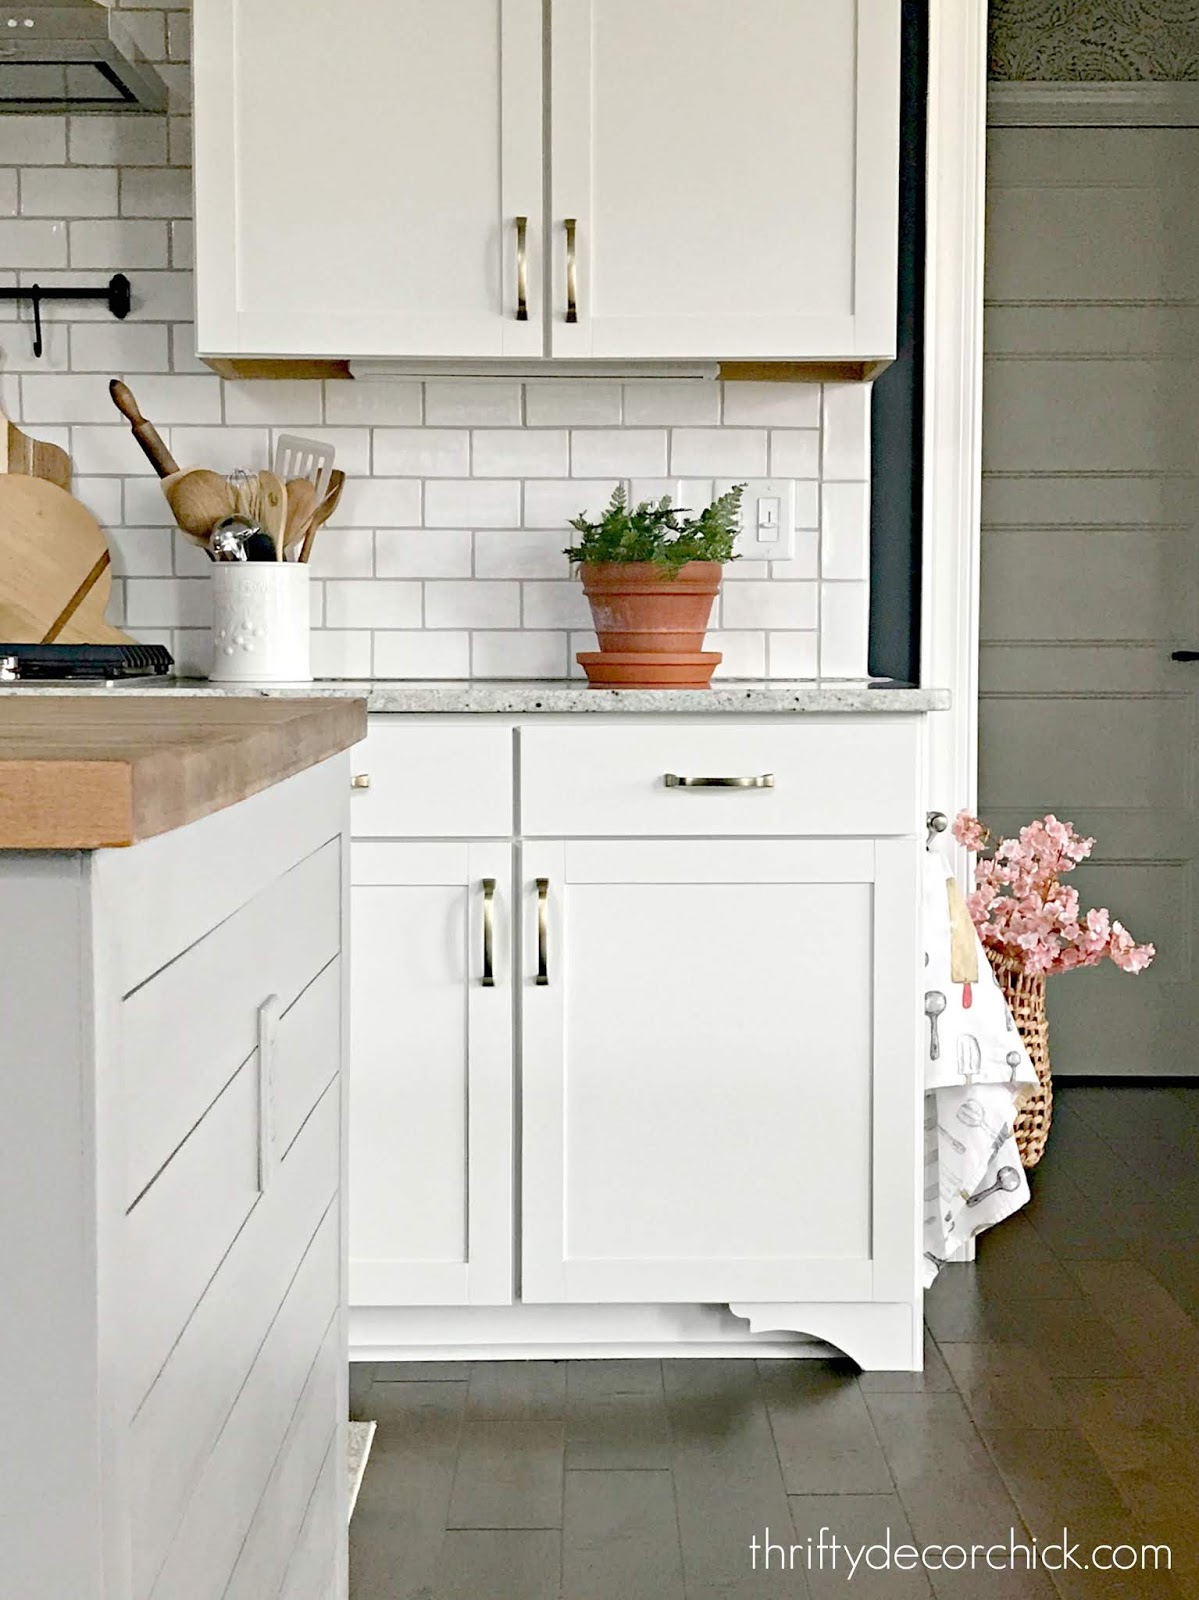 Little projects that add character to kitchen